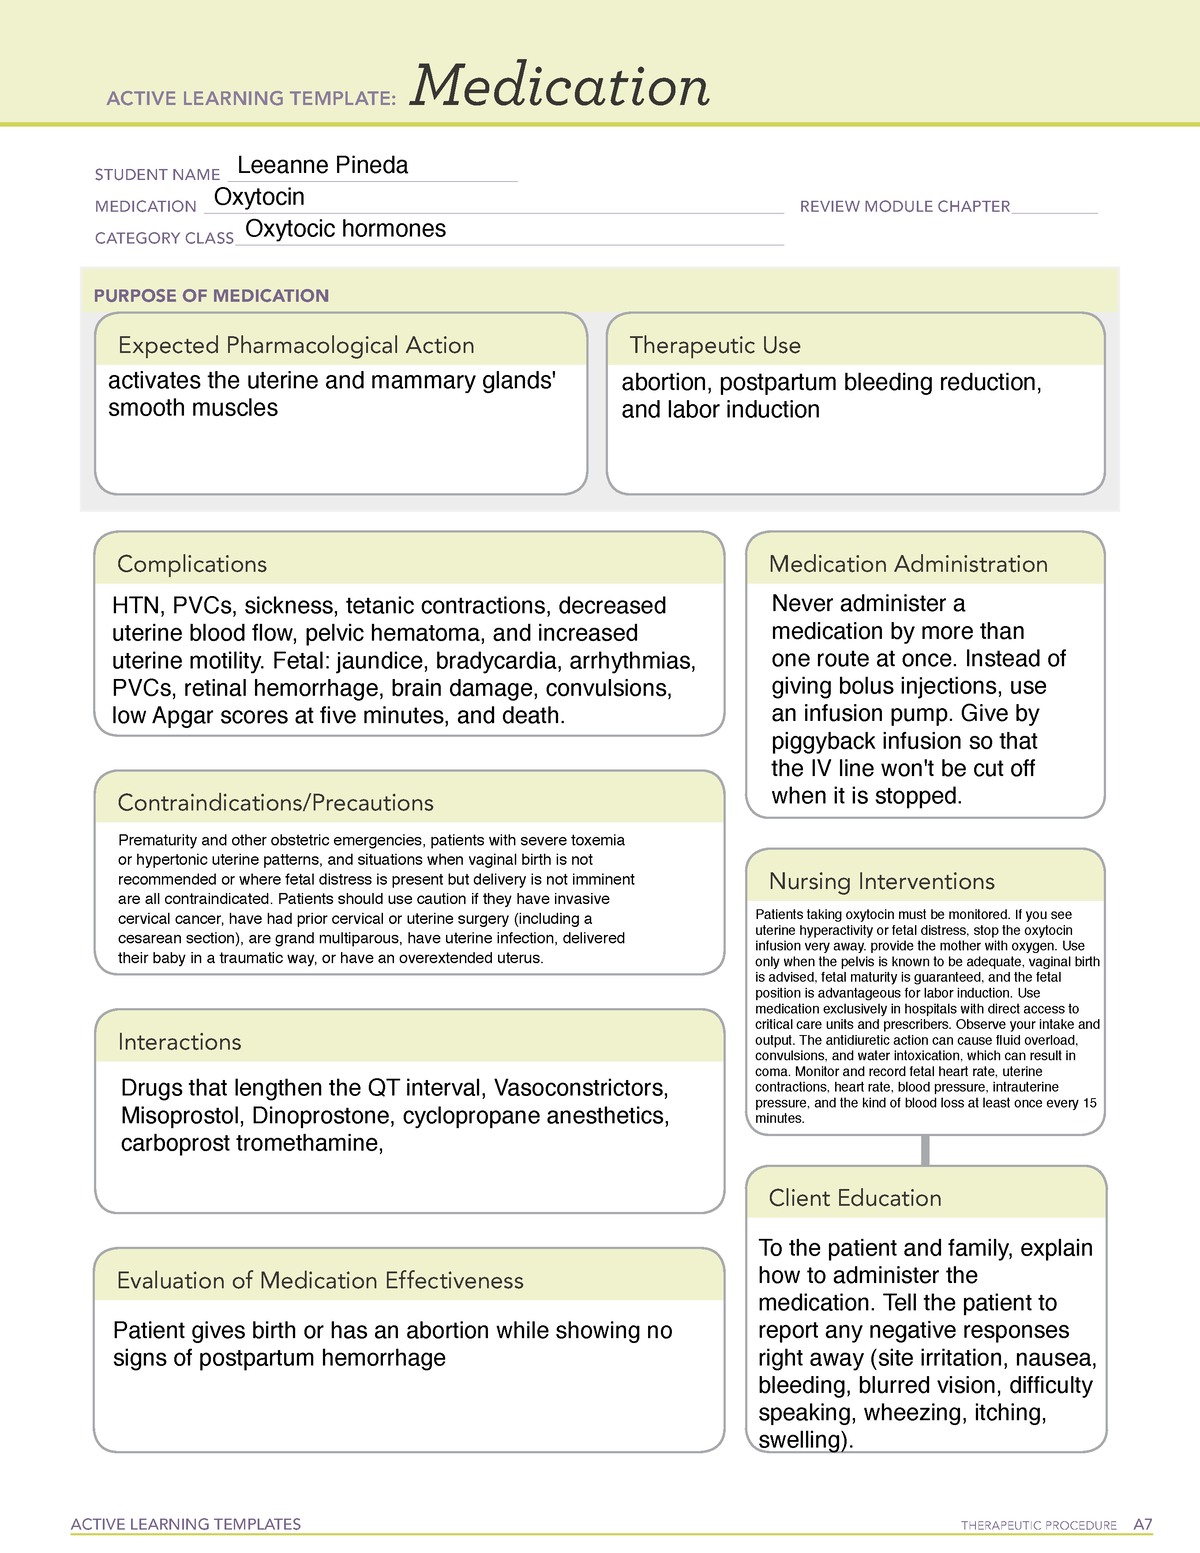 Oxytocin ATI LEARNING TEMPLATE ACTIVE LEARNING TEMPLATES